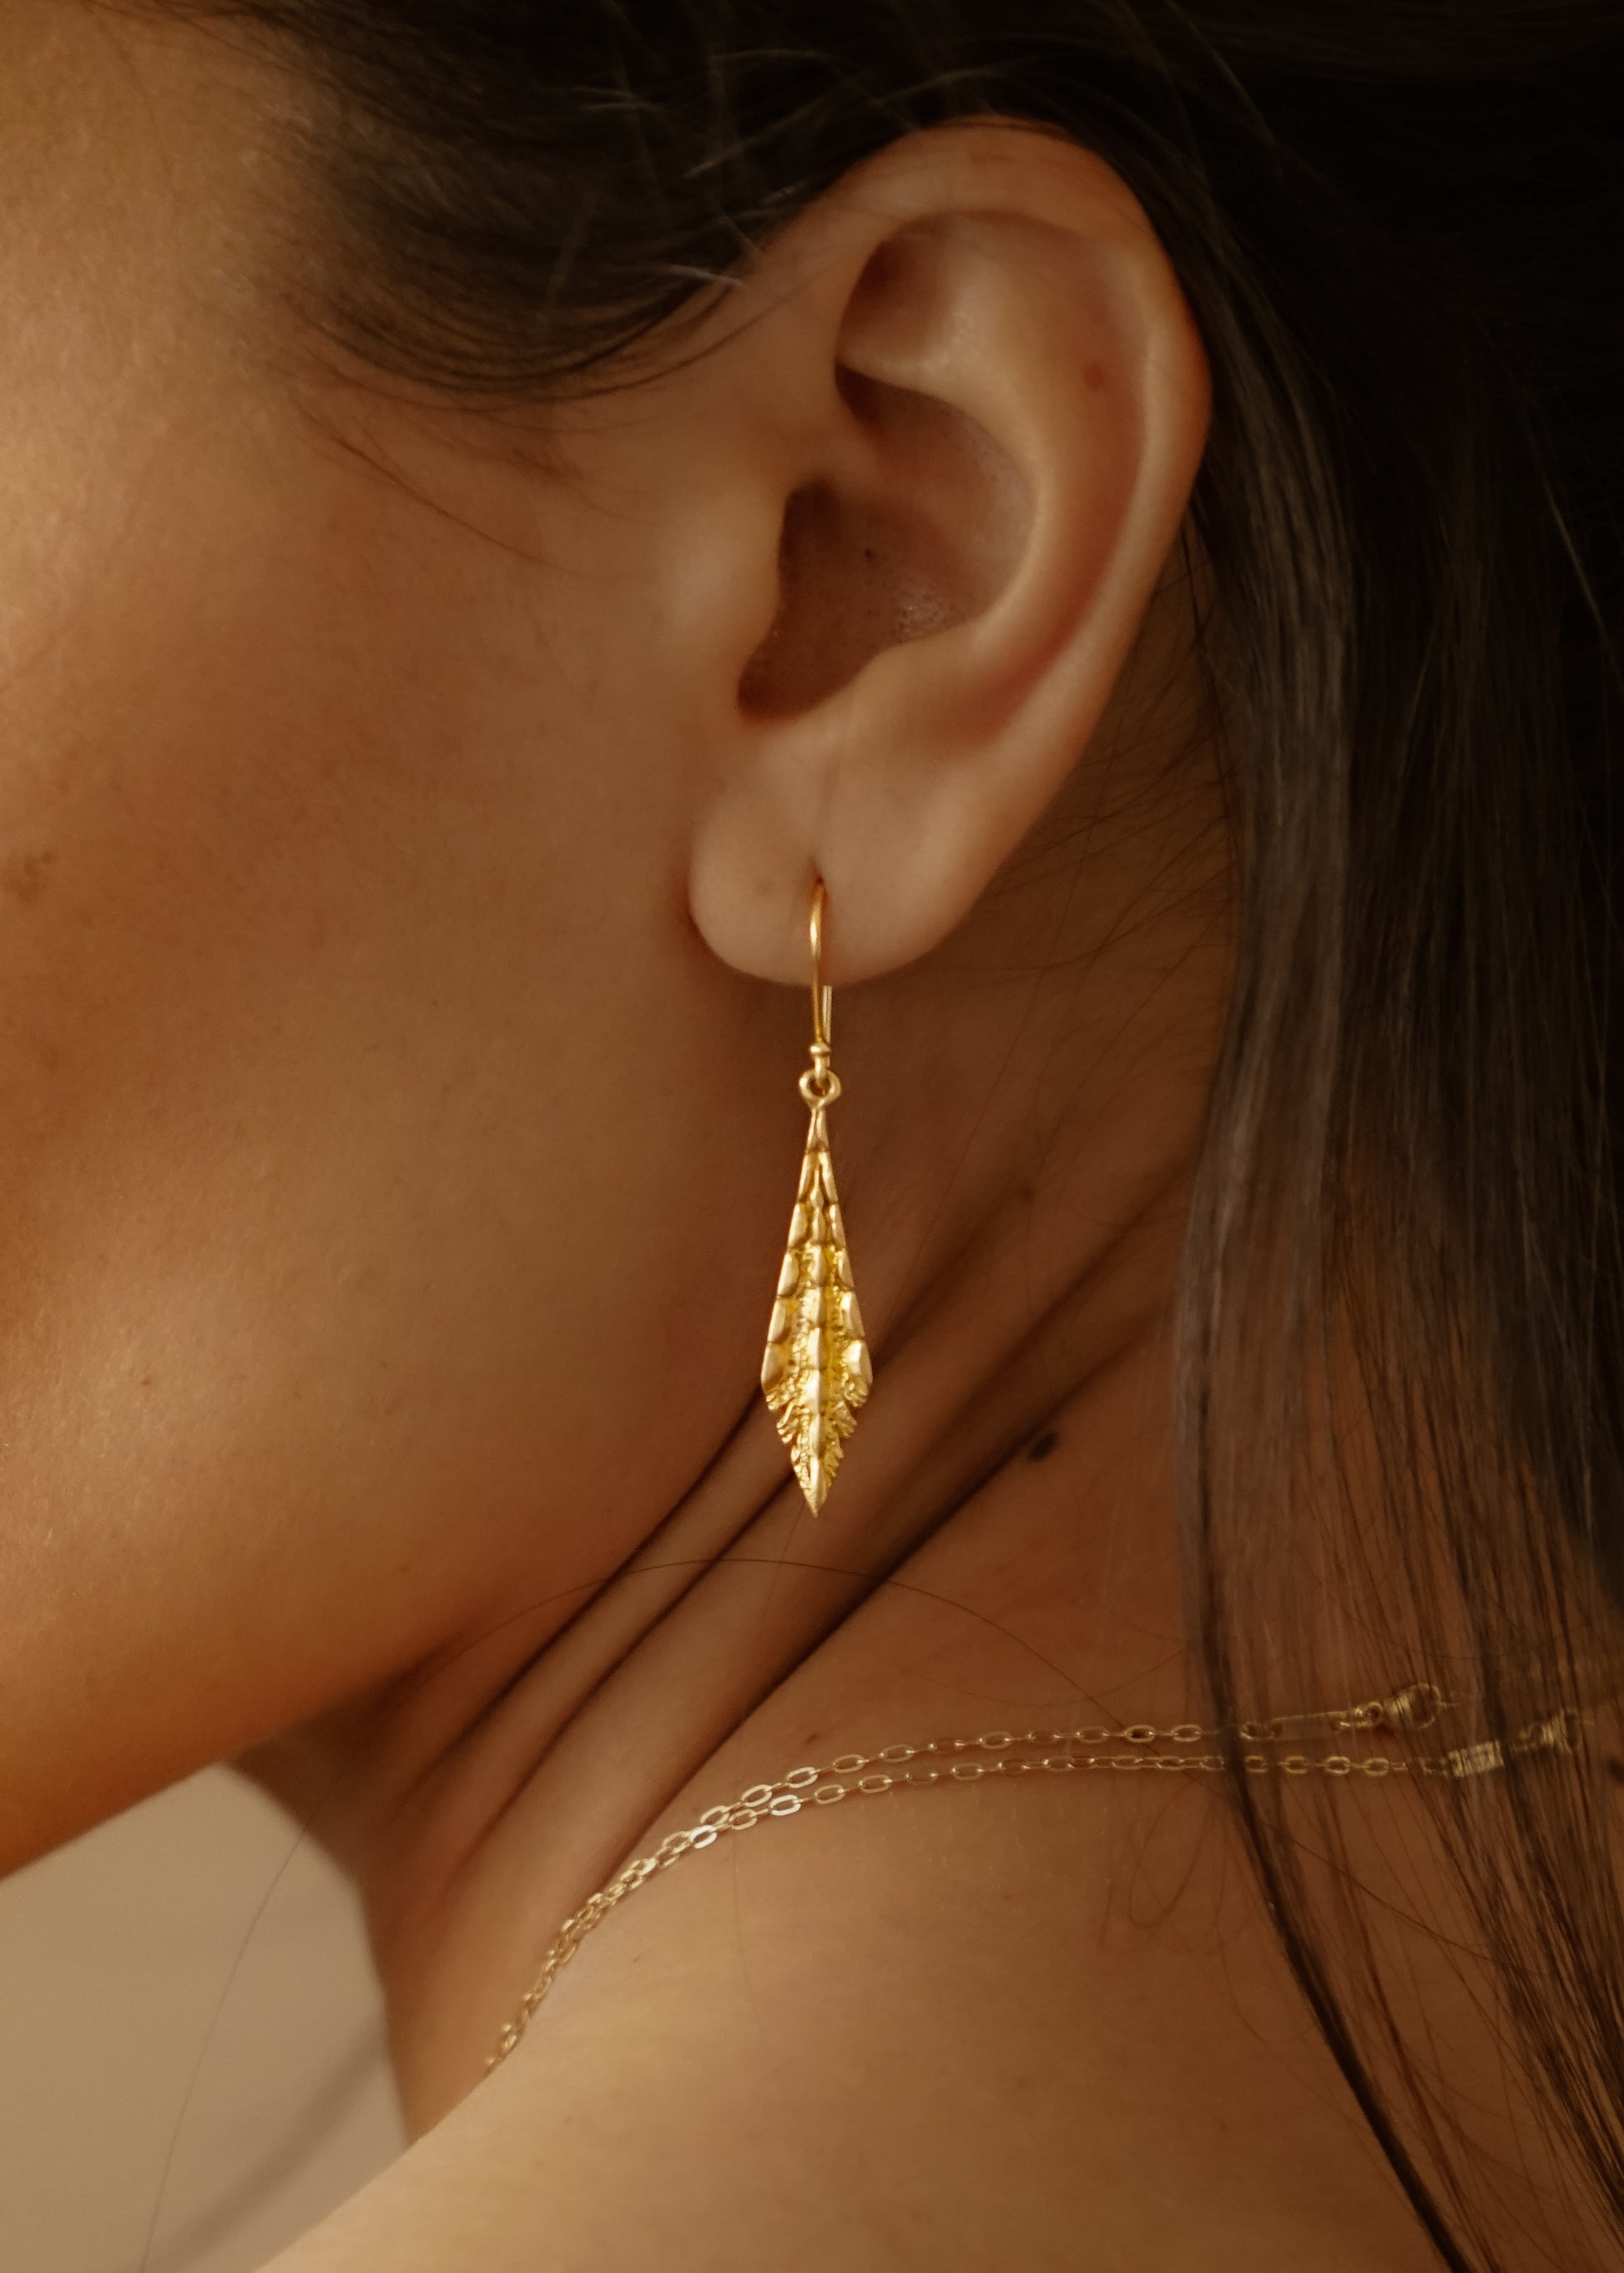 A thing of fairytales. The Cicle earring takes its cue from icicles glinting on scalloped rooftops made of sugar crystals, revealing intricate detail and texture that plays with the light with each turn of the head.  